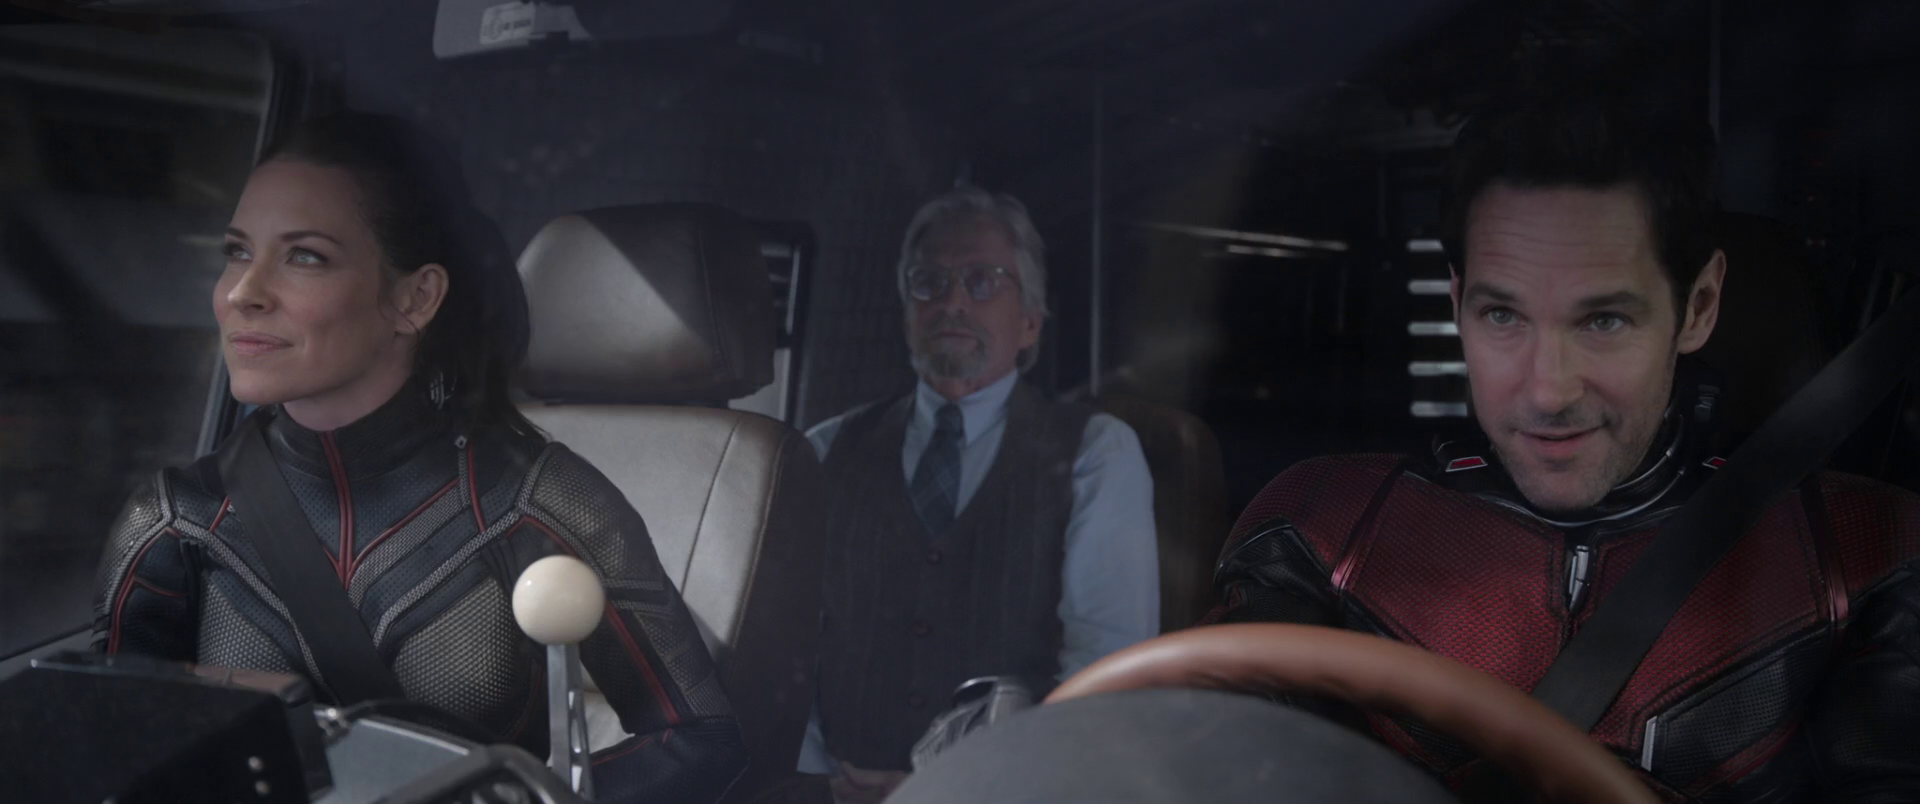 Scott Lang (Paul Rudd), Hope Van Dyne (Evangeline Lily), and Hank Pym (Michael Douglas) search out Sonny Burch (Walton Goggins) in Ant-Man and the Wasp (2018), Marvel Entertainment